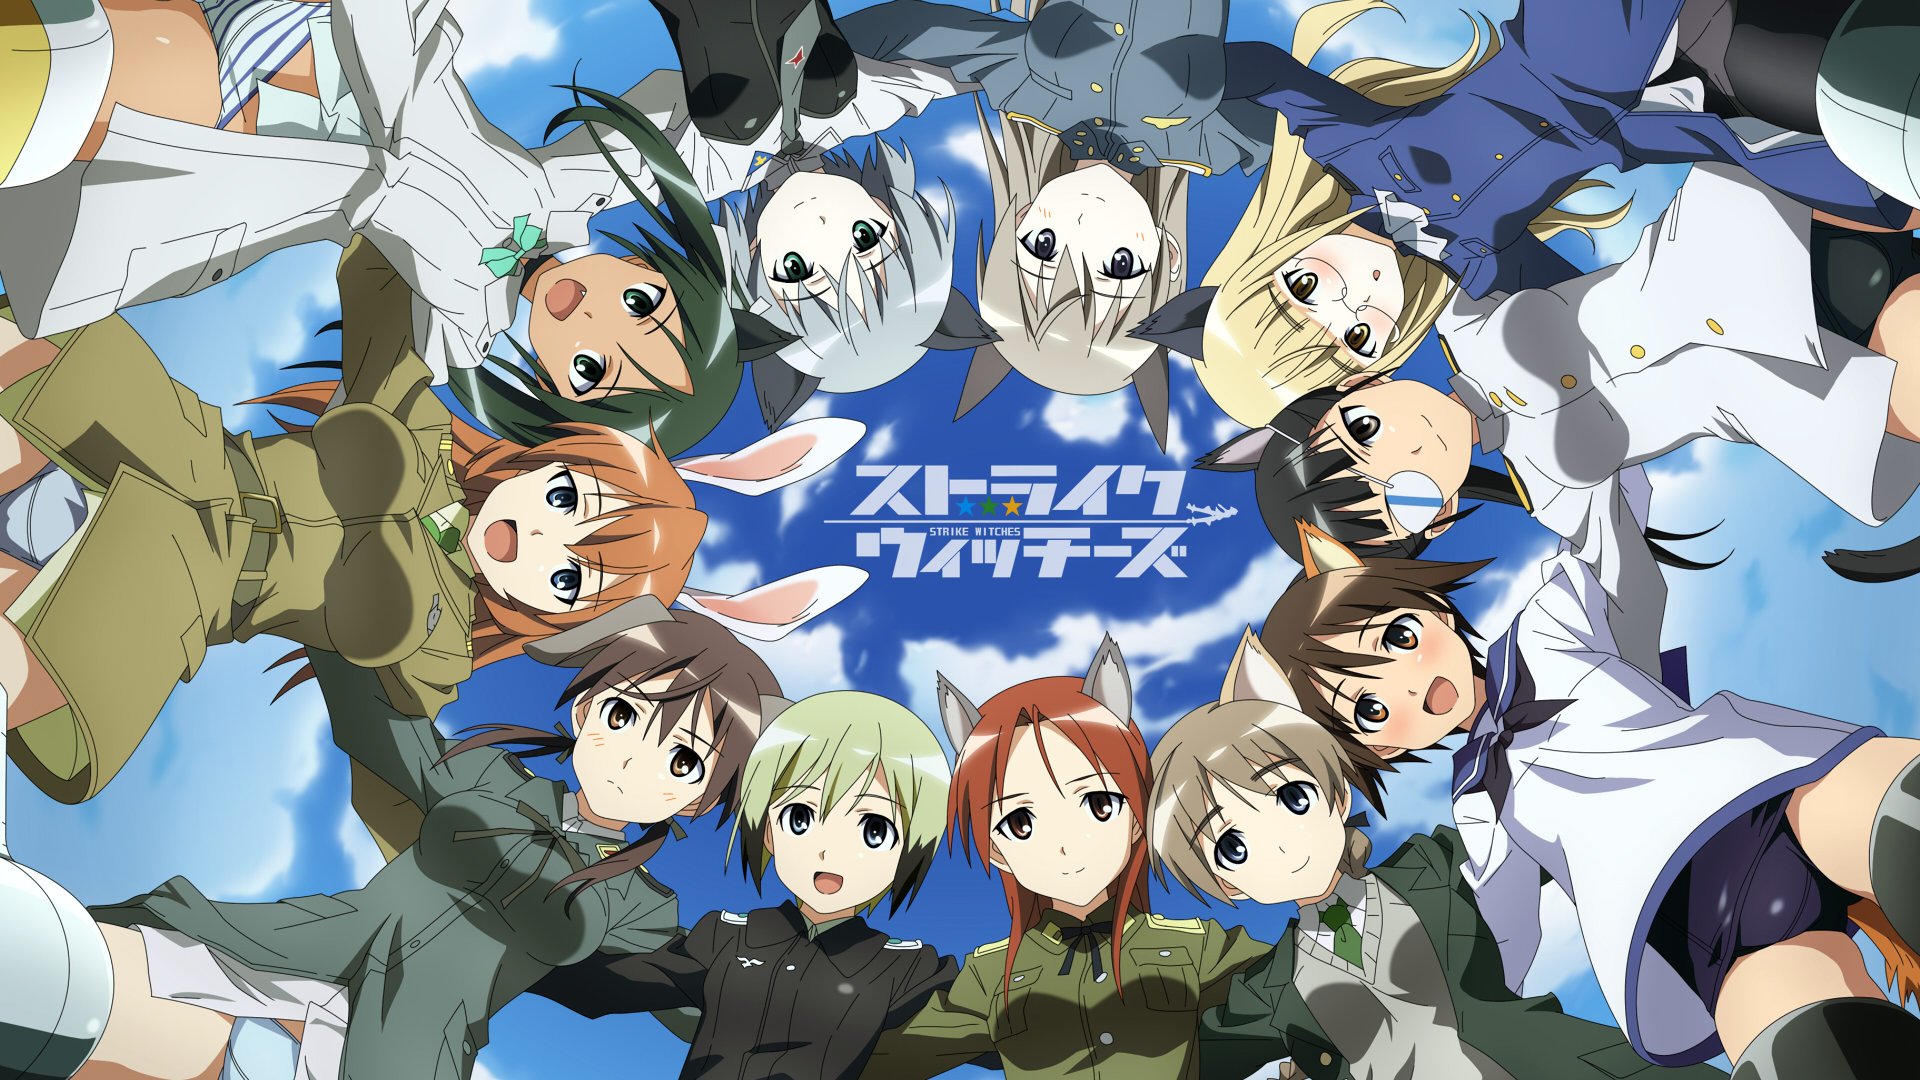 Strike Witches Backgrounds, Compatible - PC, Mobile, Gadgets| 1920x1080 px